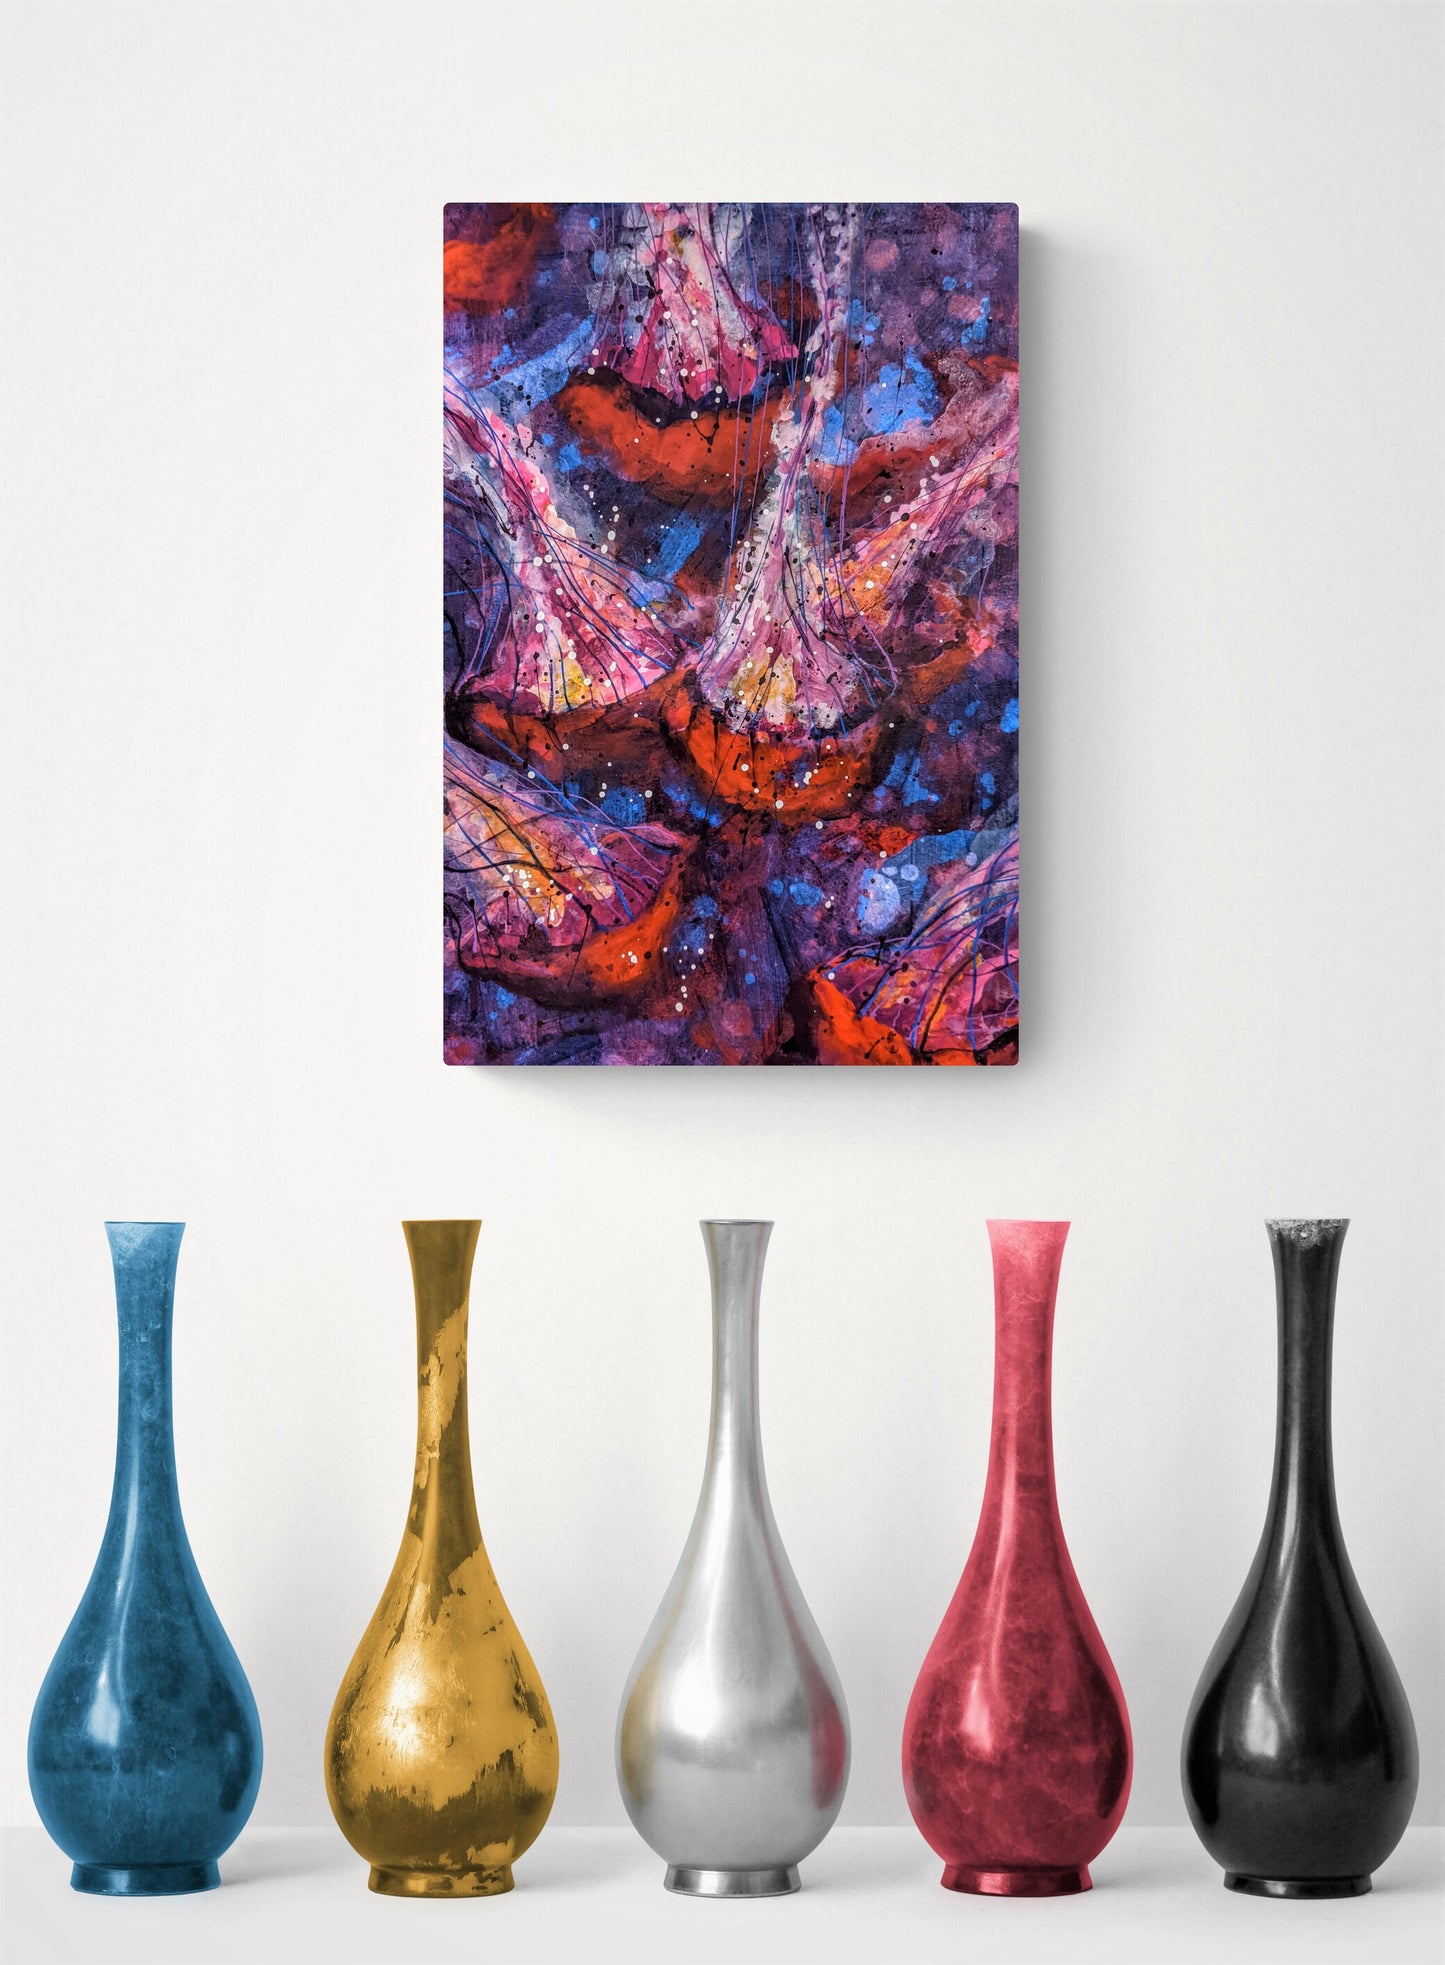 Purple & Red Jellyfish in the Deep acrylic painting on paper in room with vases